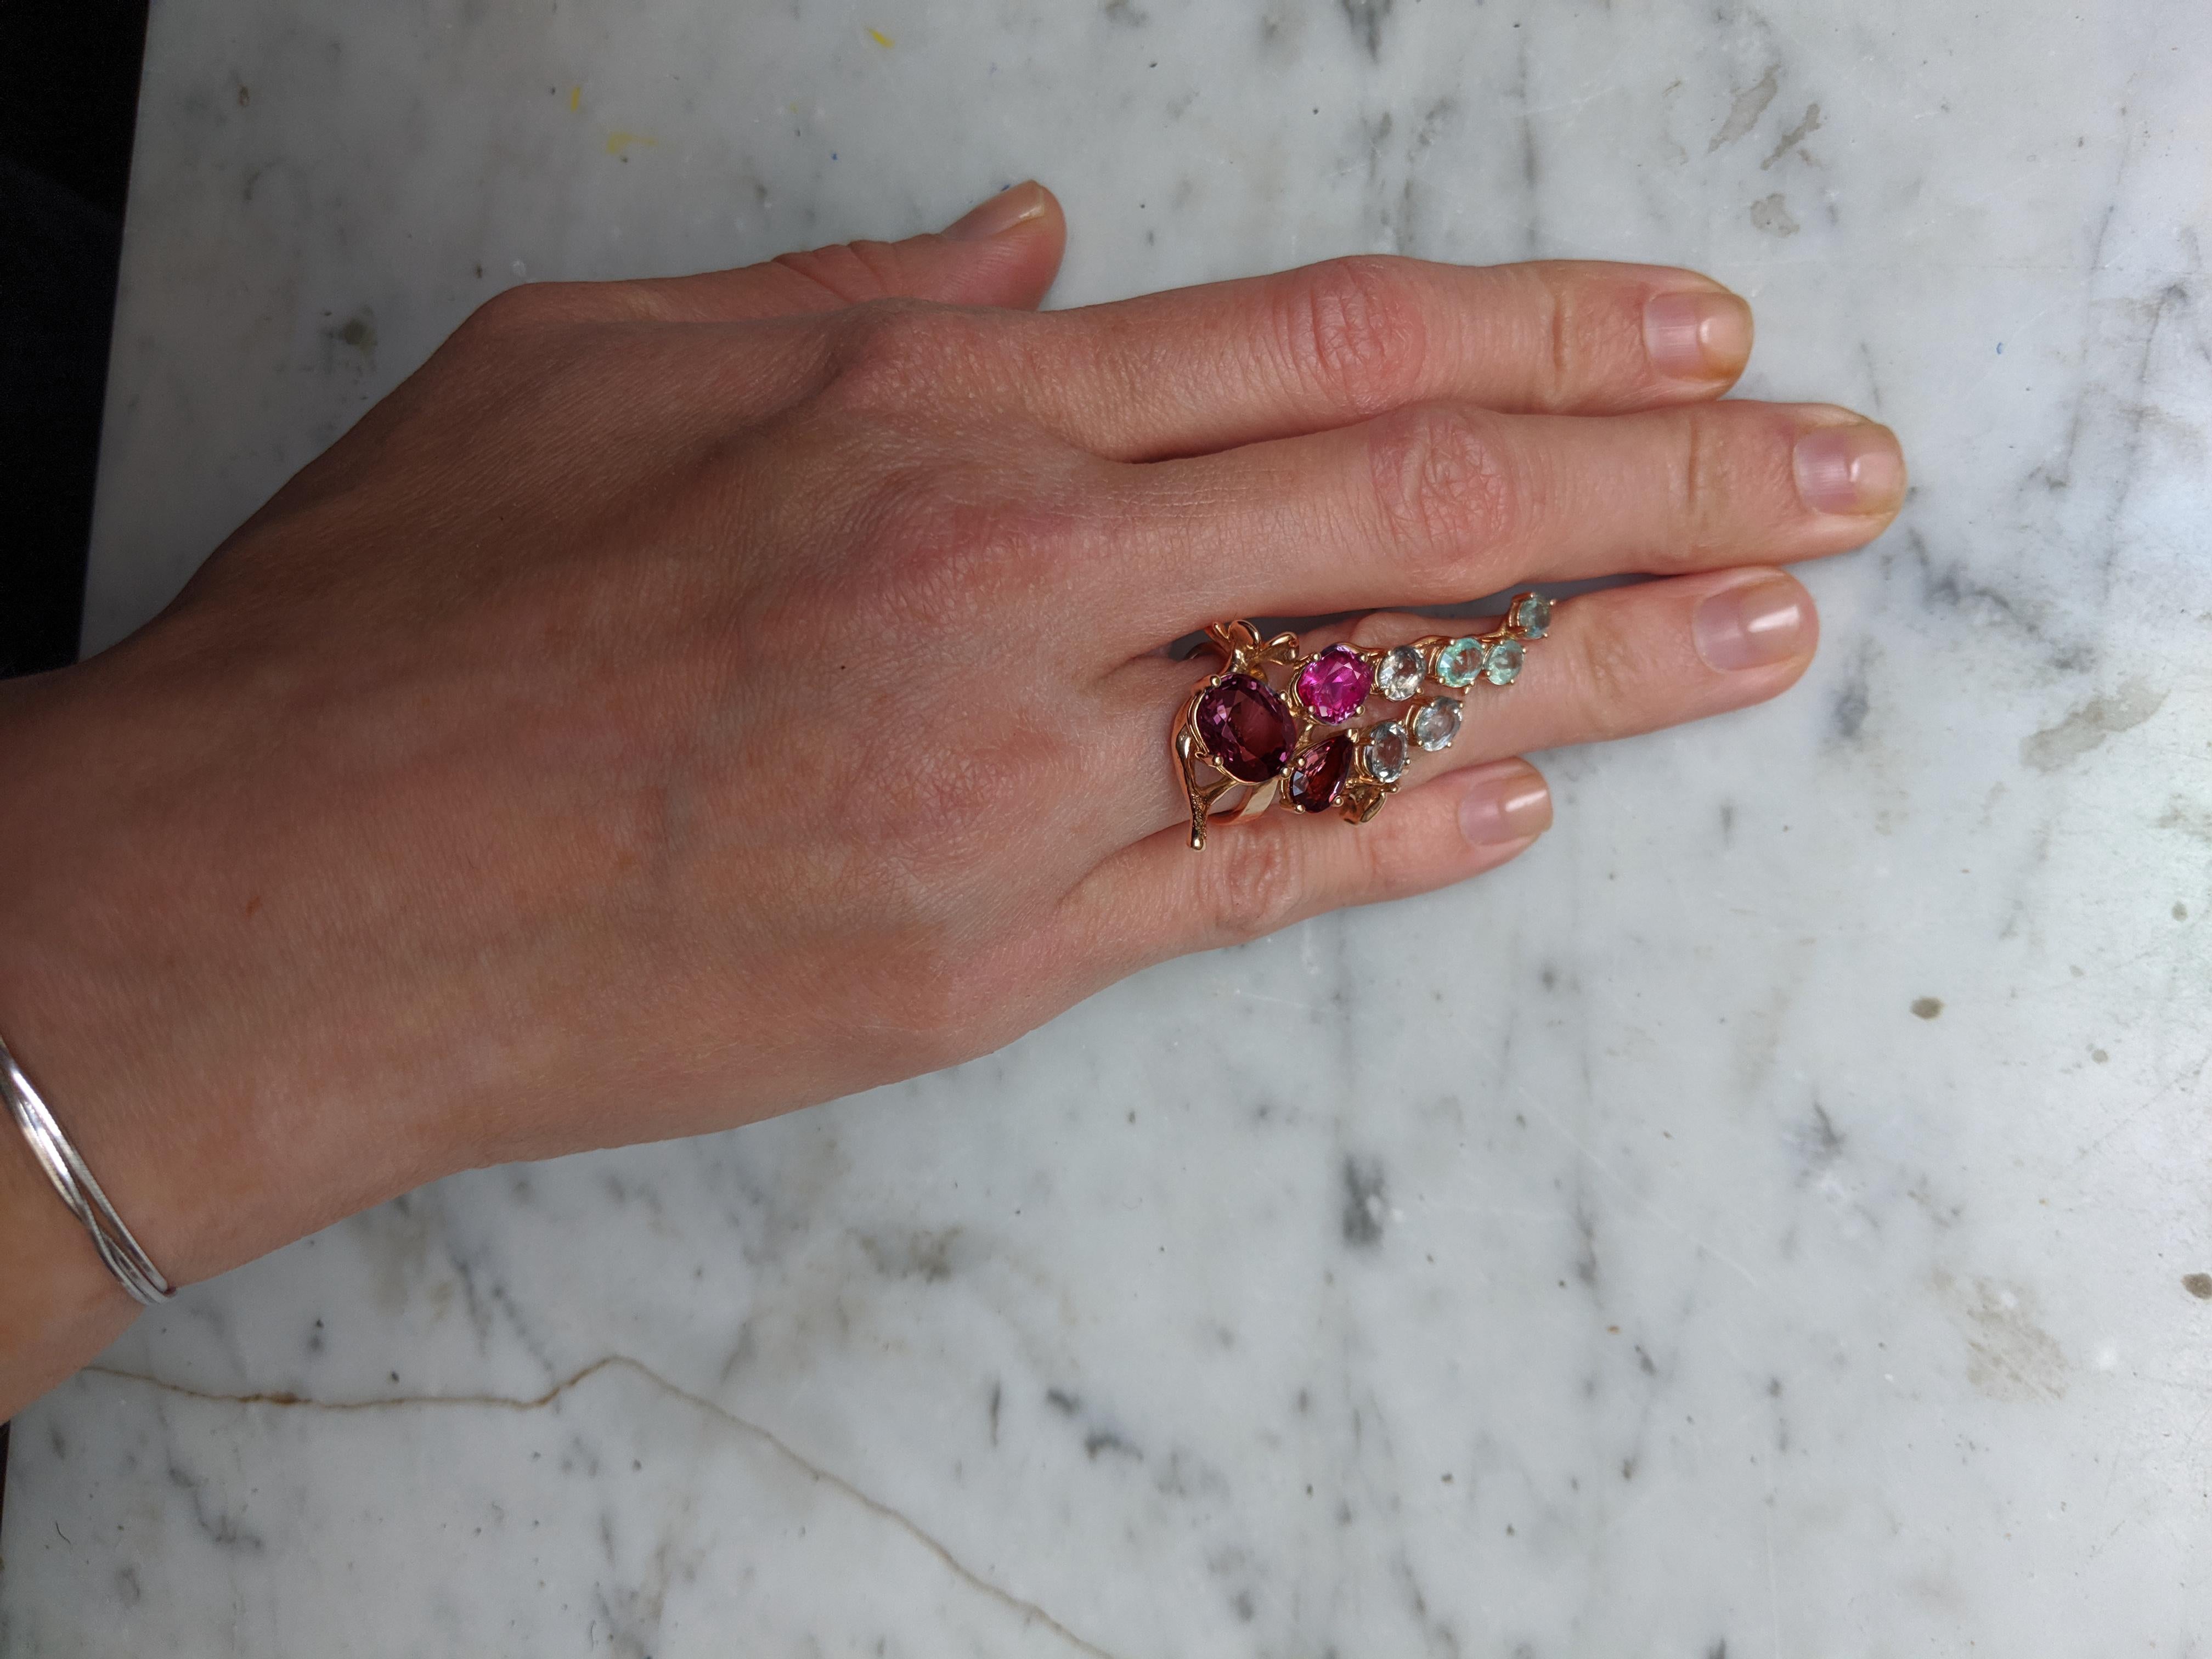 This Tobacco Flower contemporary floral cocktail ring is made of 18 karat rose gold.
The natural gems are:
Oval ruby 4,27 carats, dimension: 11,16x9,36 mm.
Oval cold red sapphire, 0,95 carats.
Pear cut cold malaya garnet, 1,25 carats.
Green oval cut